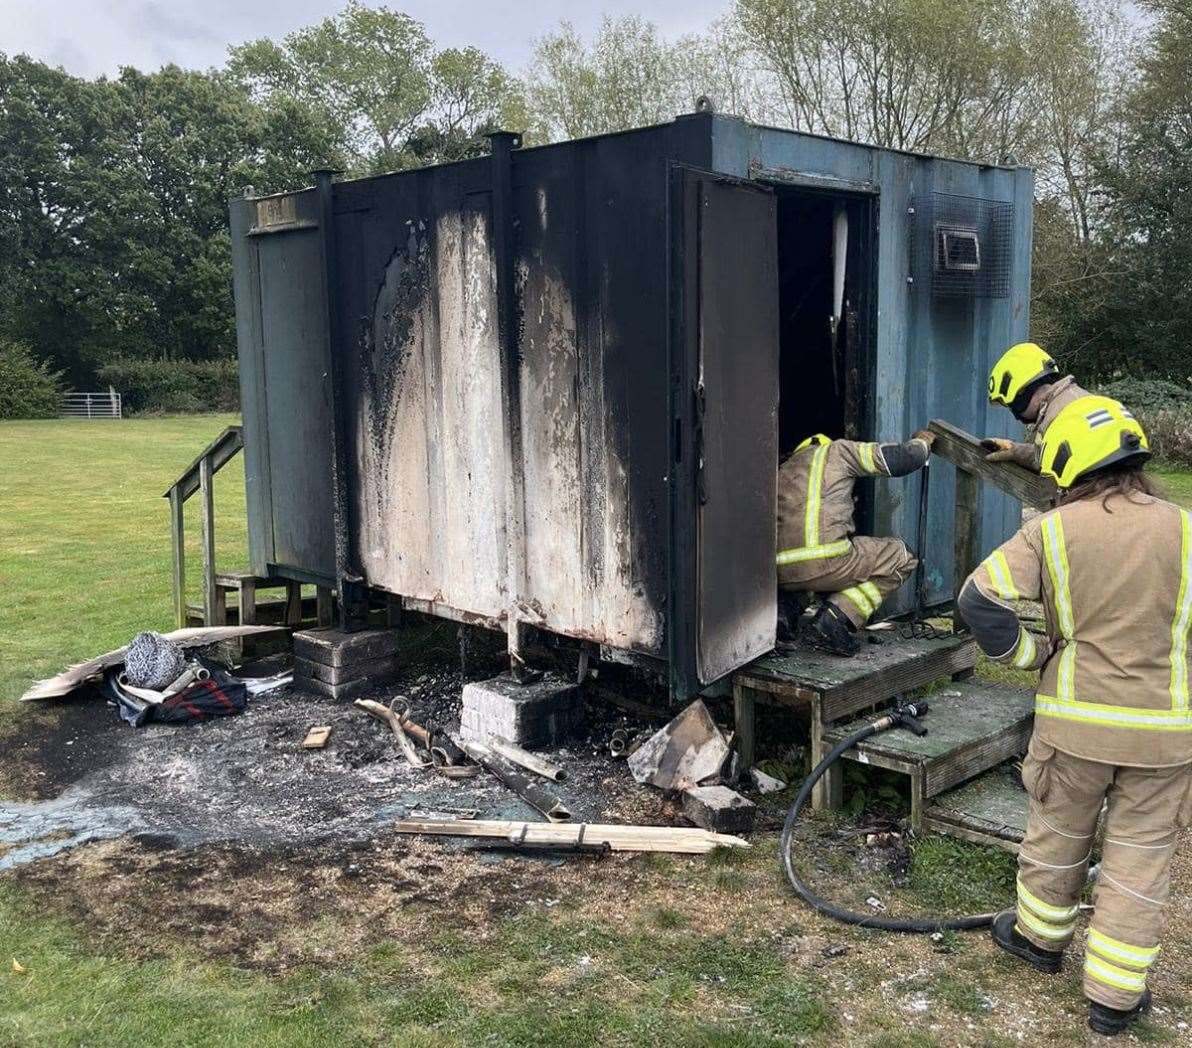 The aftermath of the fire at Rolvenden Tigers FC. Pic: Rolvenden Tigers FC